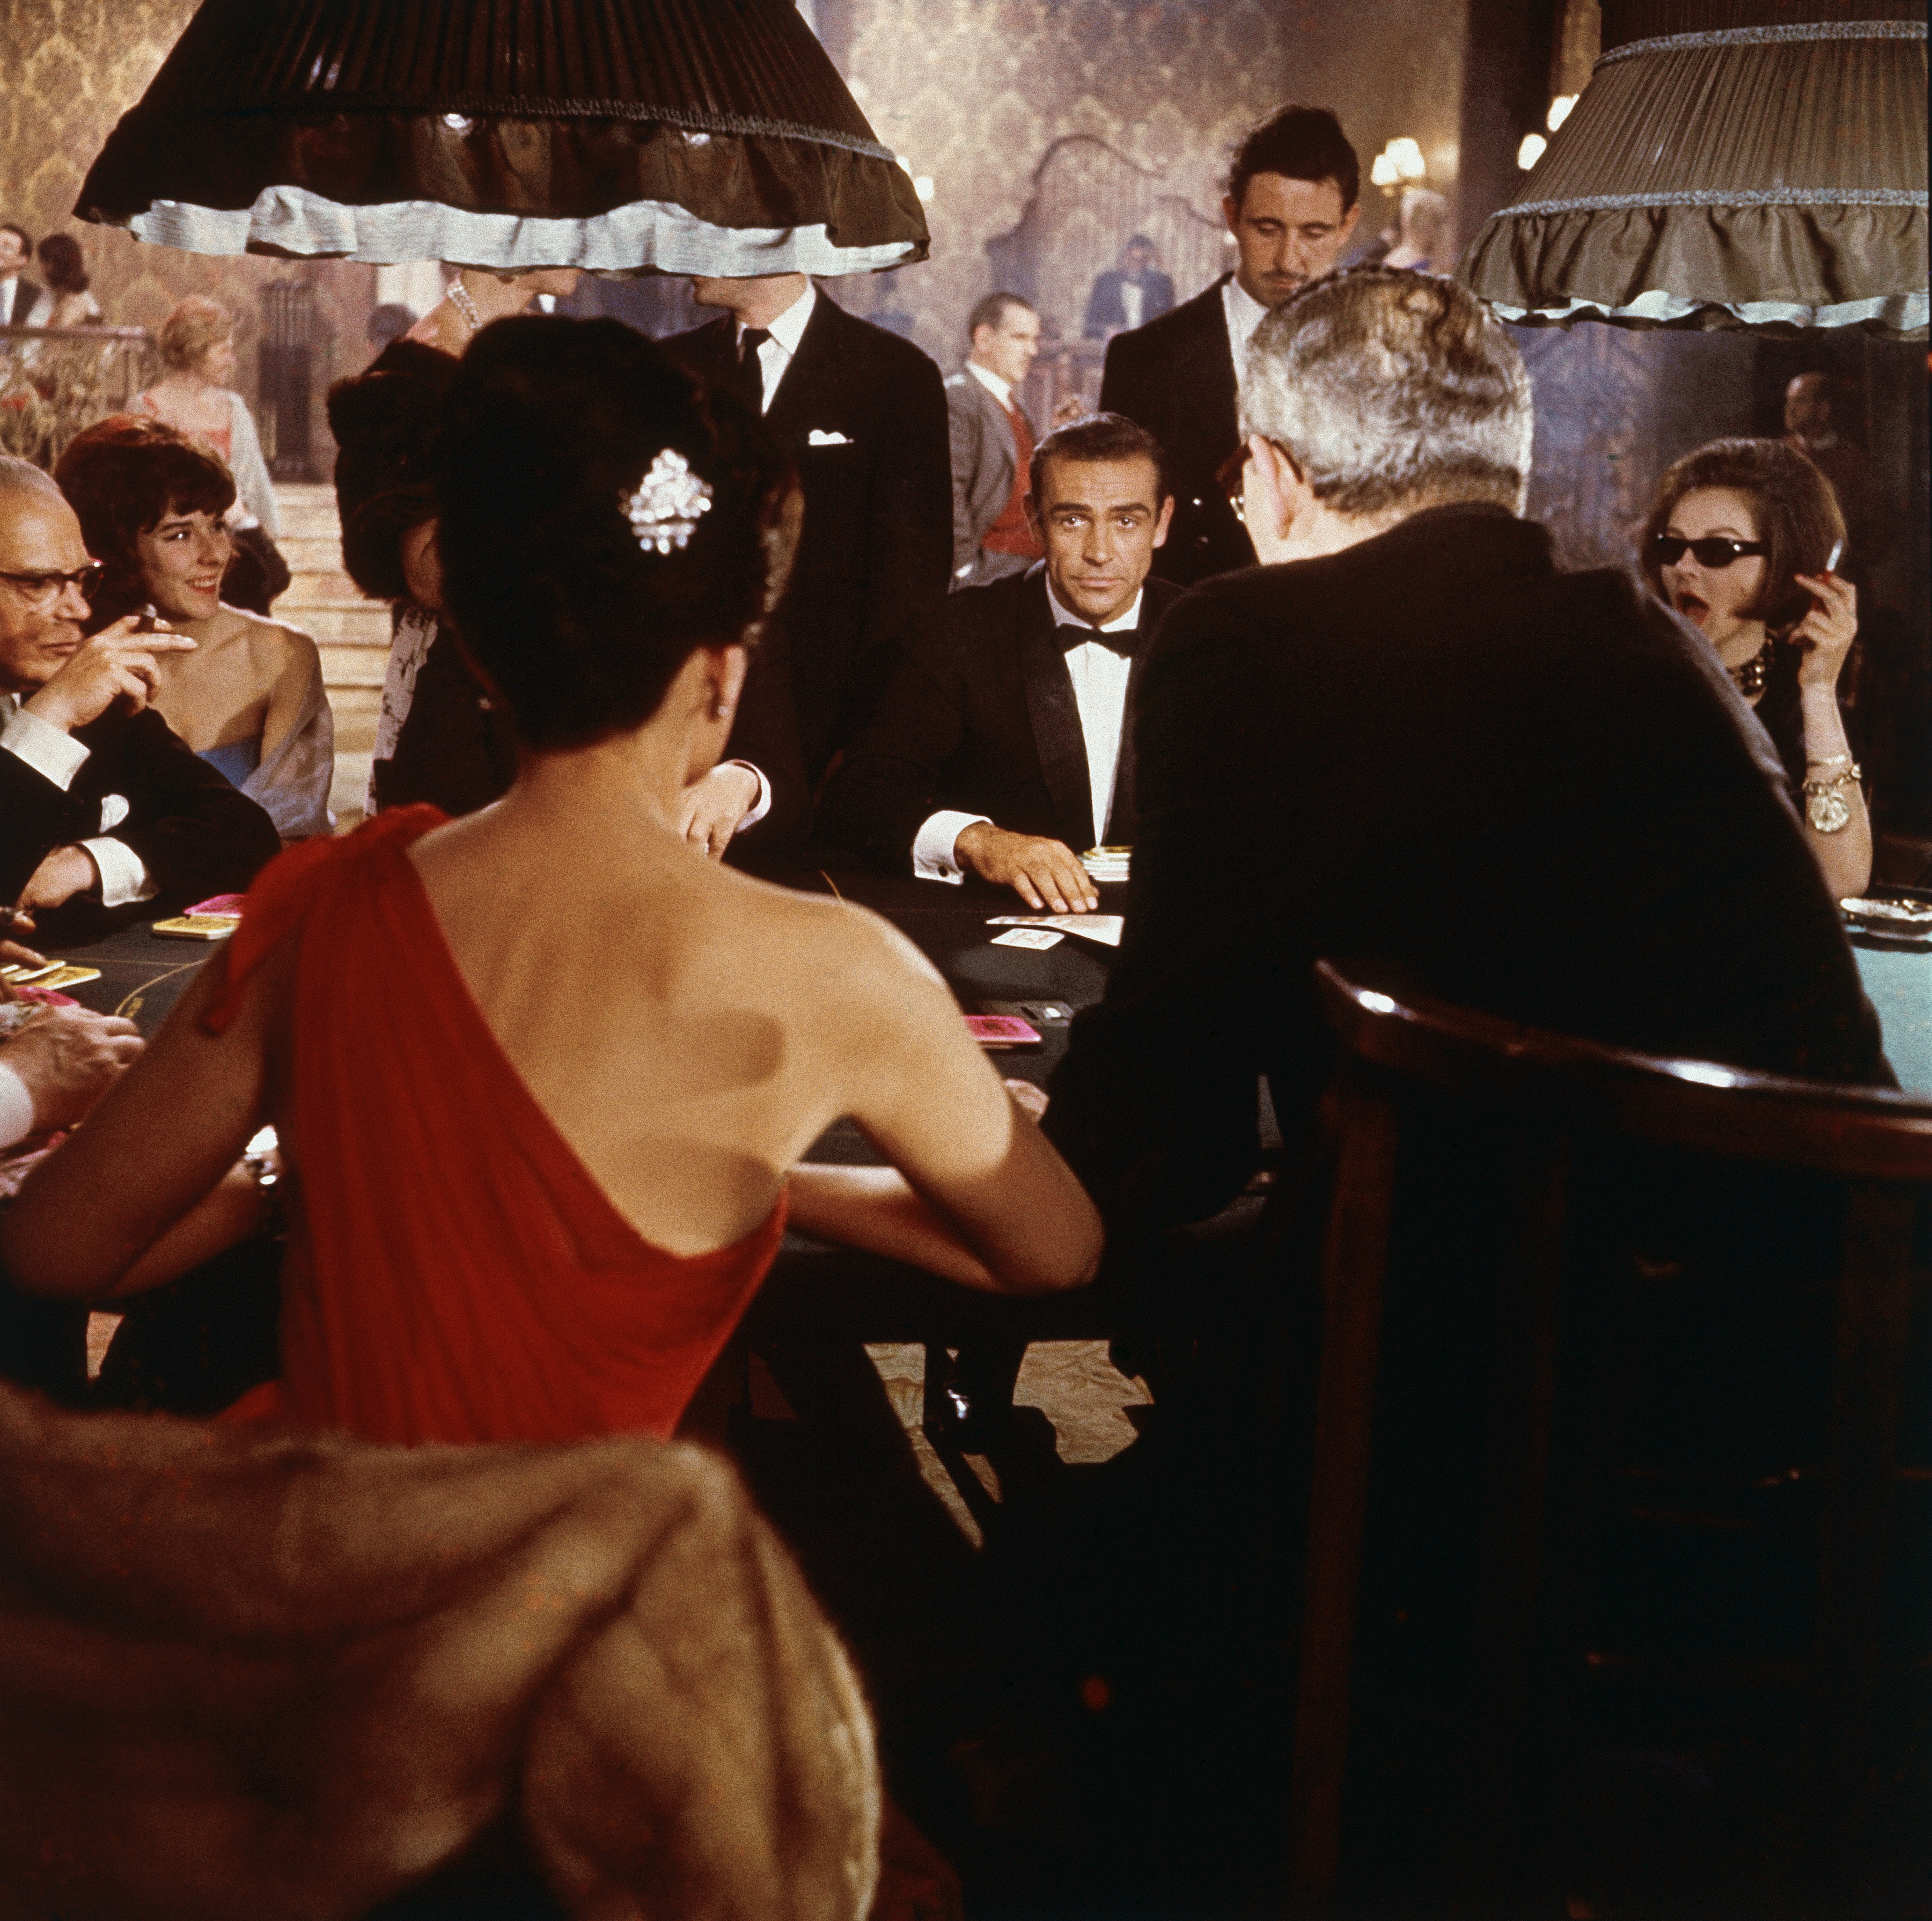 Scottish actor Sean Connery (center) as fictional secret agent James Bond sits at a casino card table in a scene from the film 'Dr. No,' directed by Terence Young, 1962. British actress Eunice Gayson sits with her back to the camera in a red, off the shoulder dress. (MGM Studios/Courtesy of Getty Images)